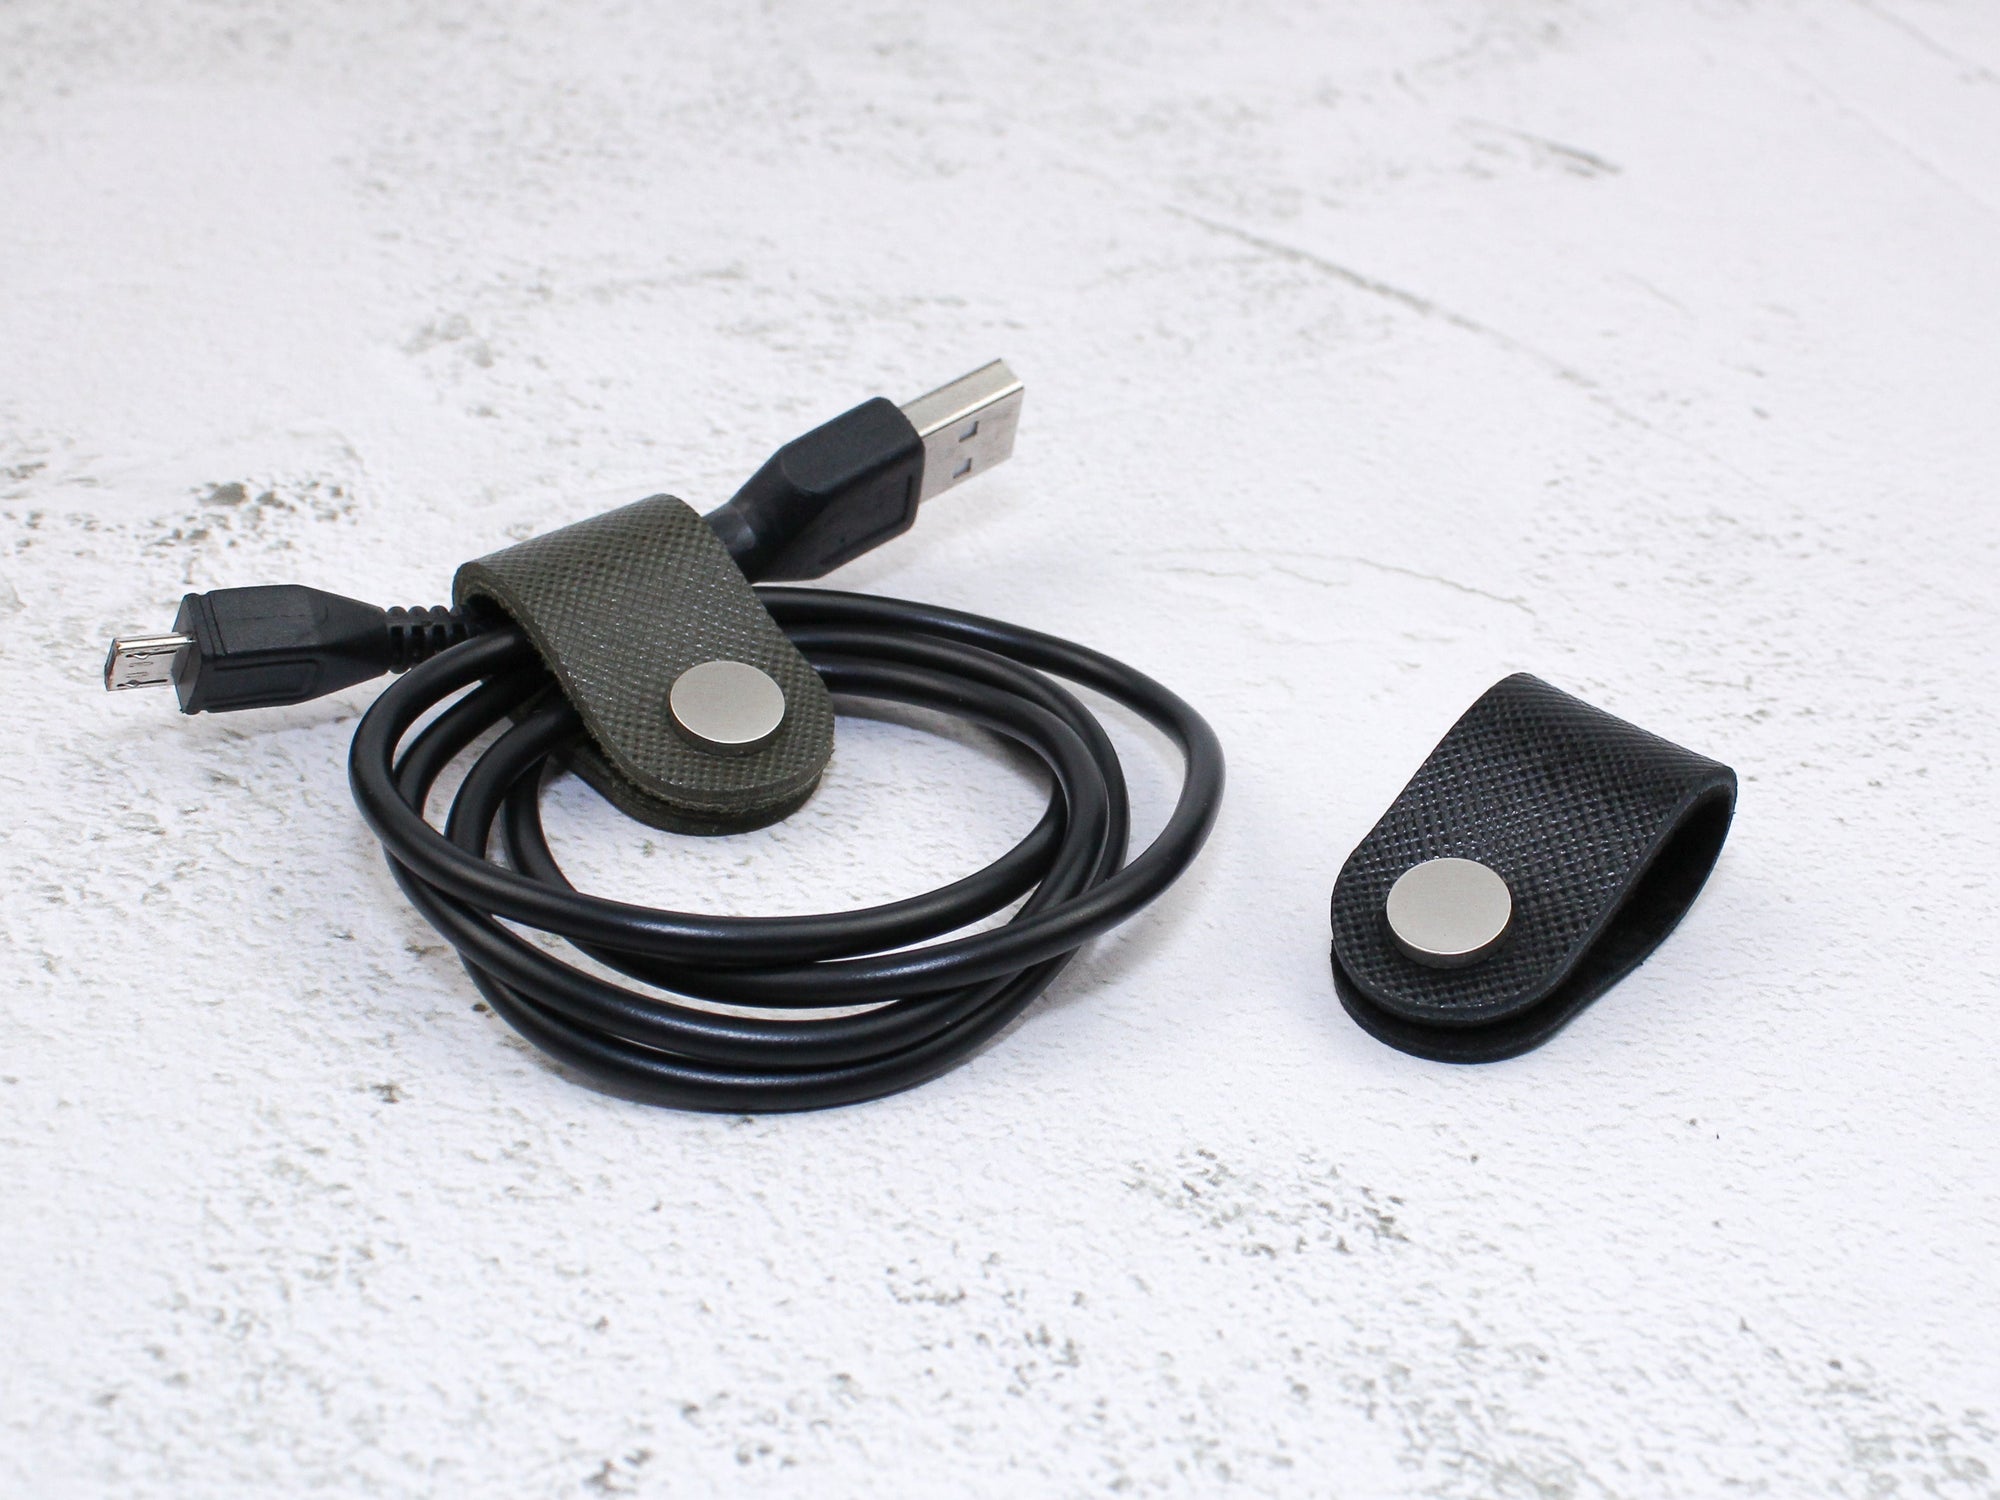 Set of 2 Cord Organiser Wraps | Cable Tidies | Olive & Black Saffiano Leather with Suede